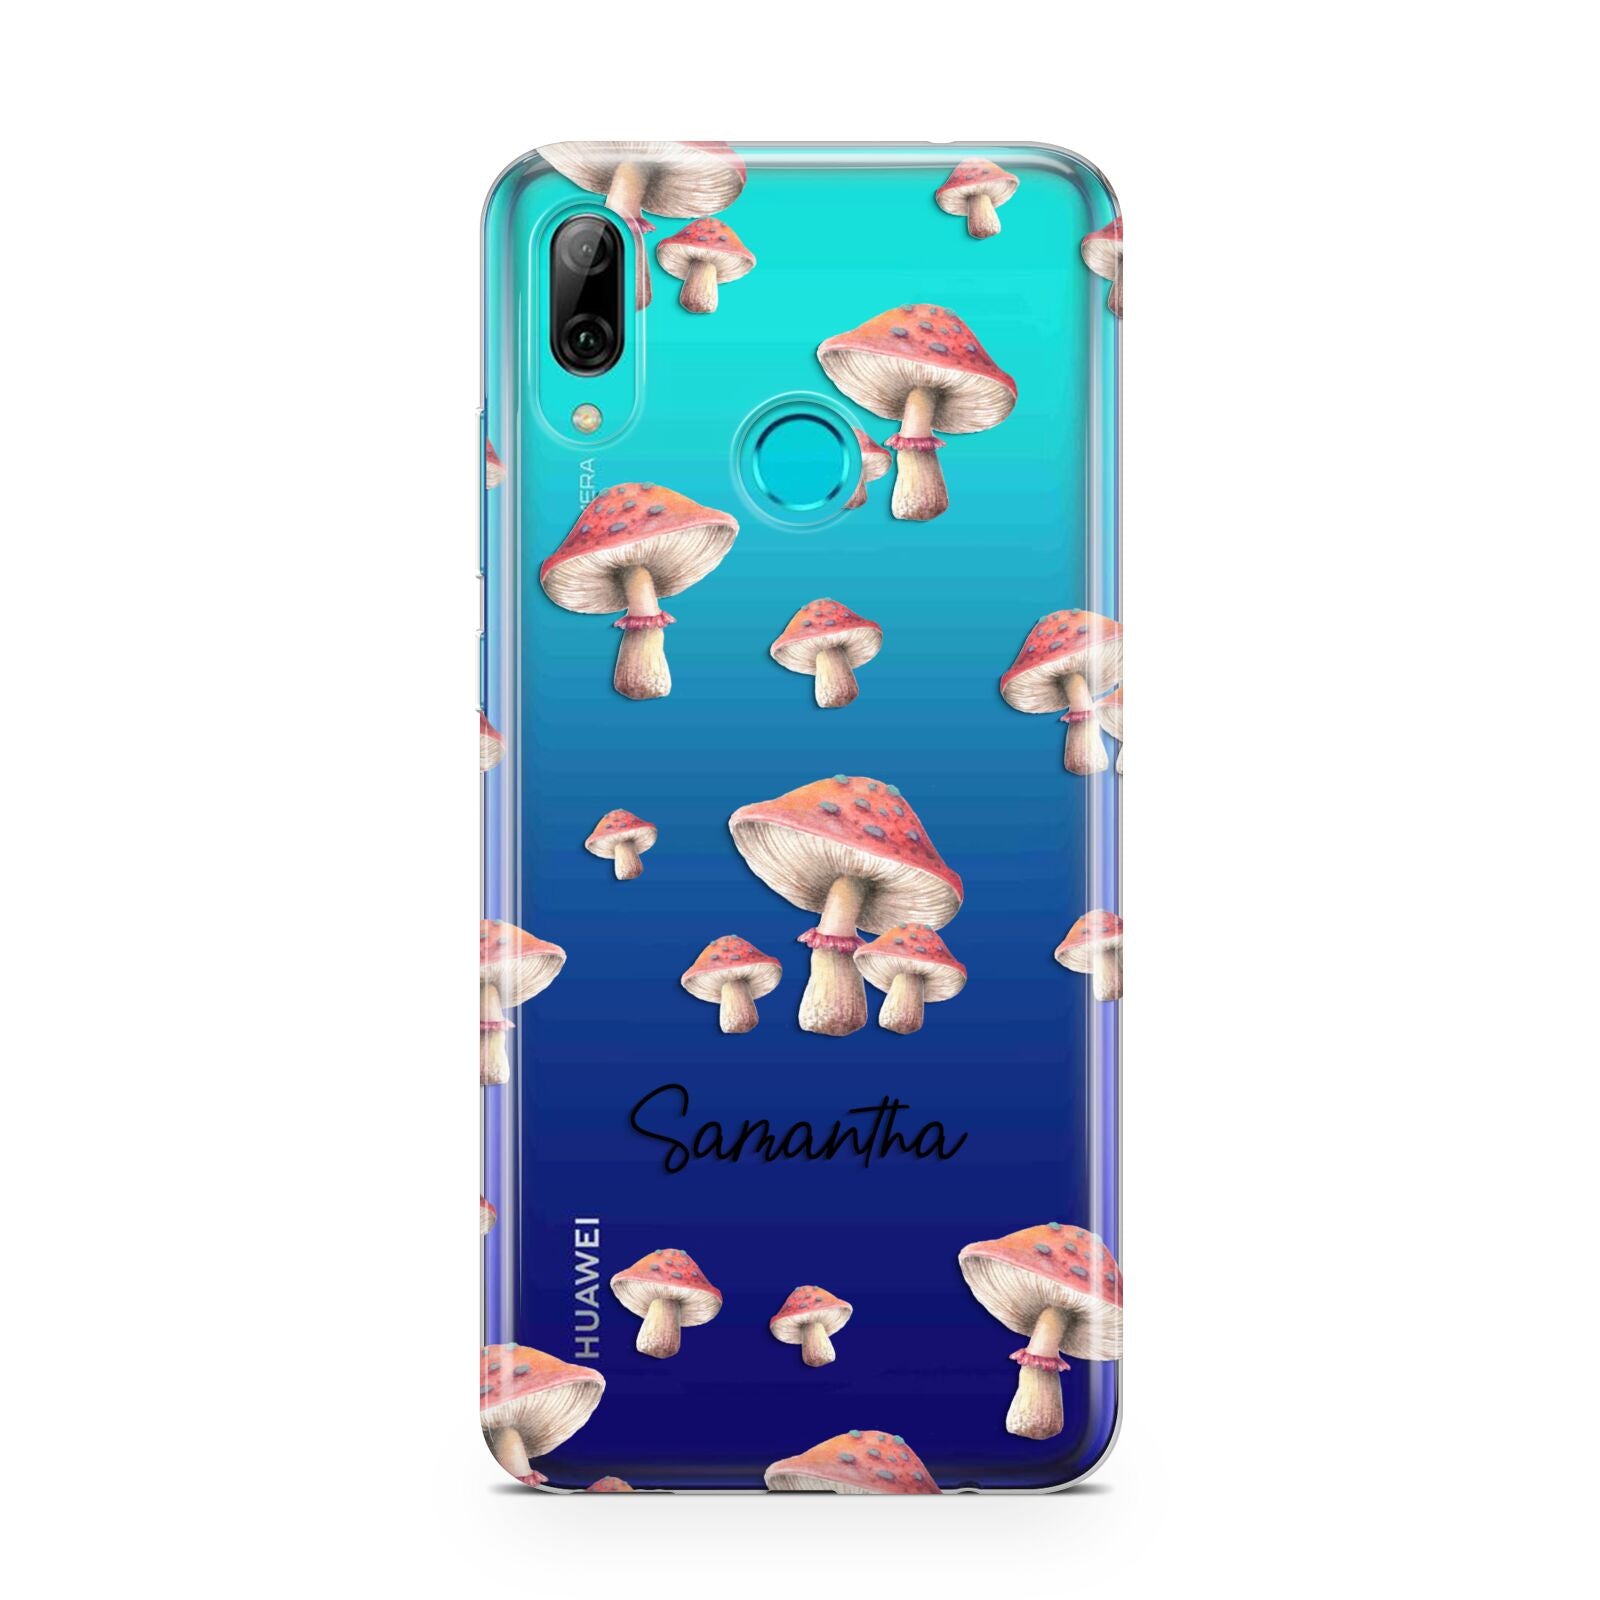 Mushroom Illustrations with Name Huawei P Smart 2019 Case